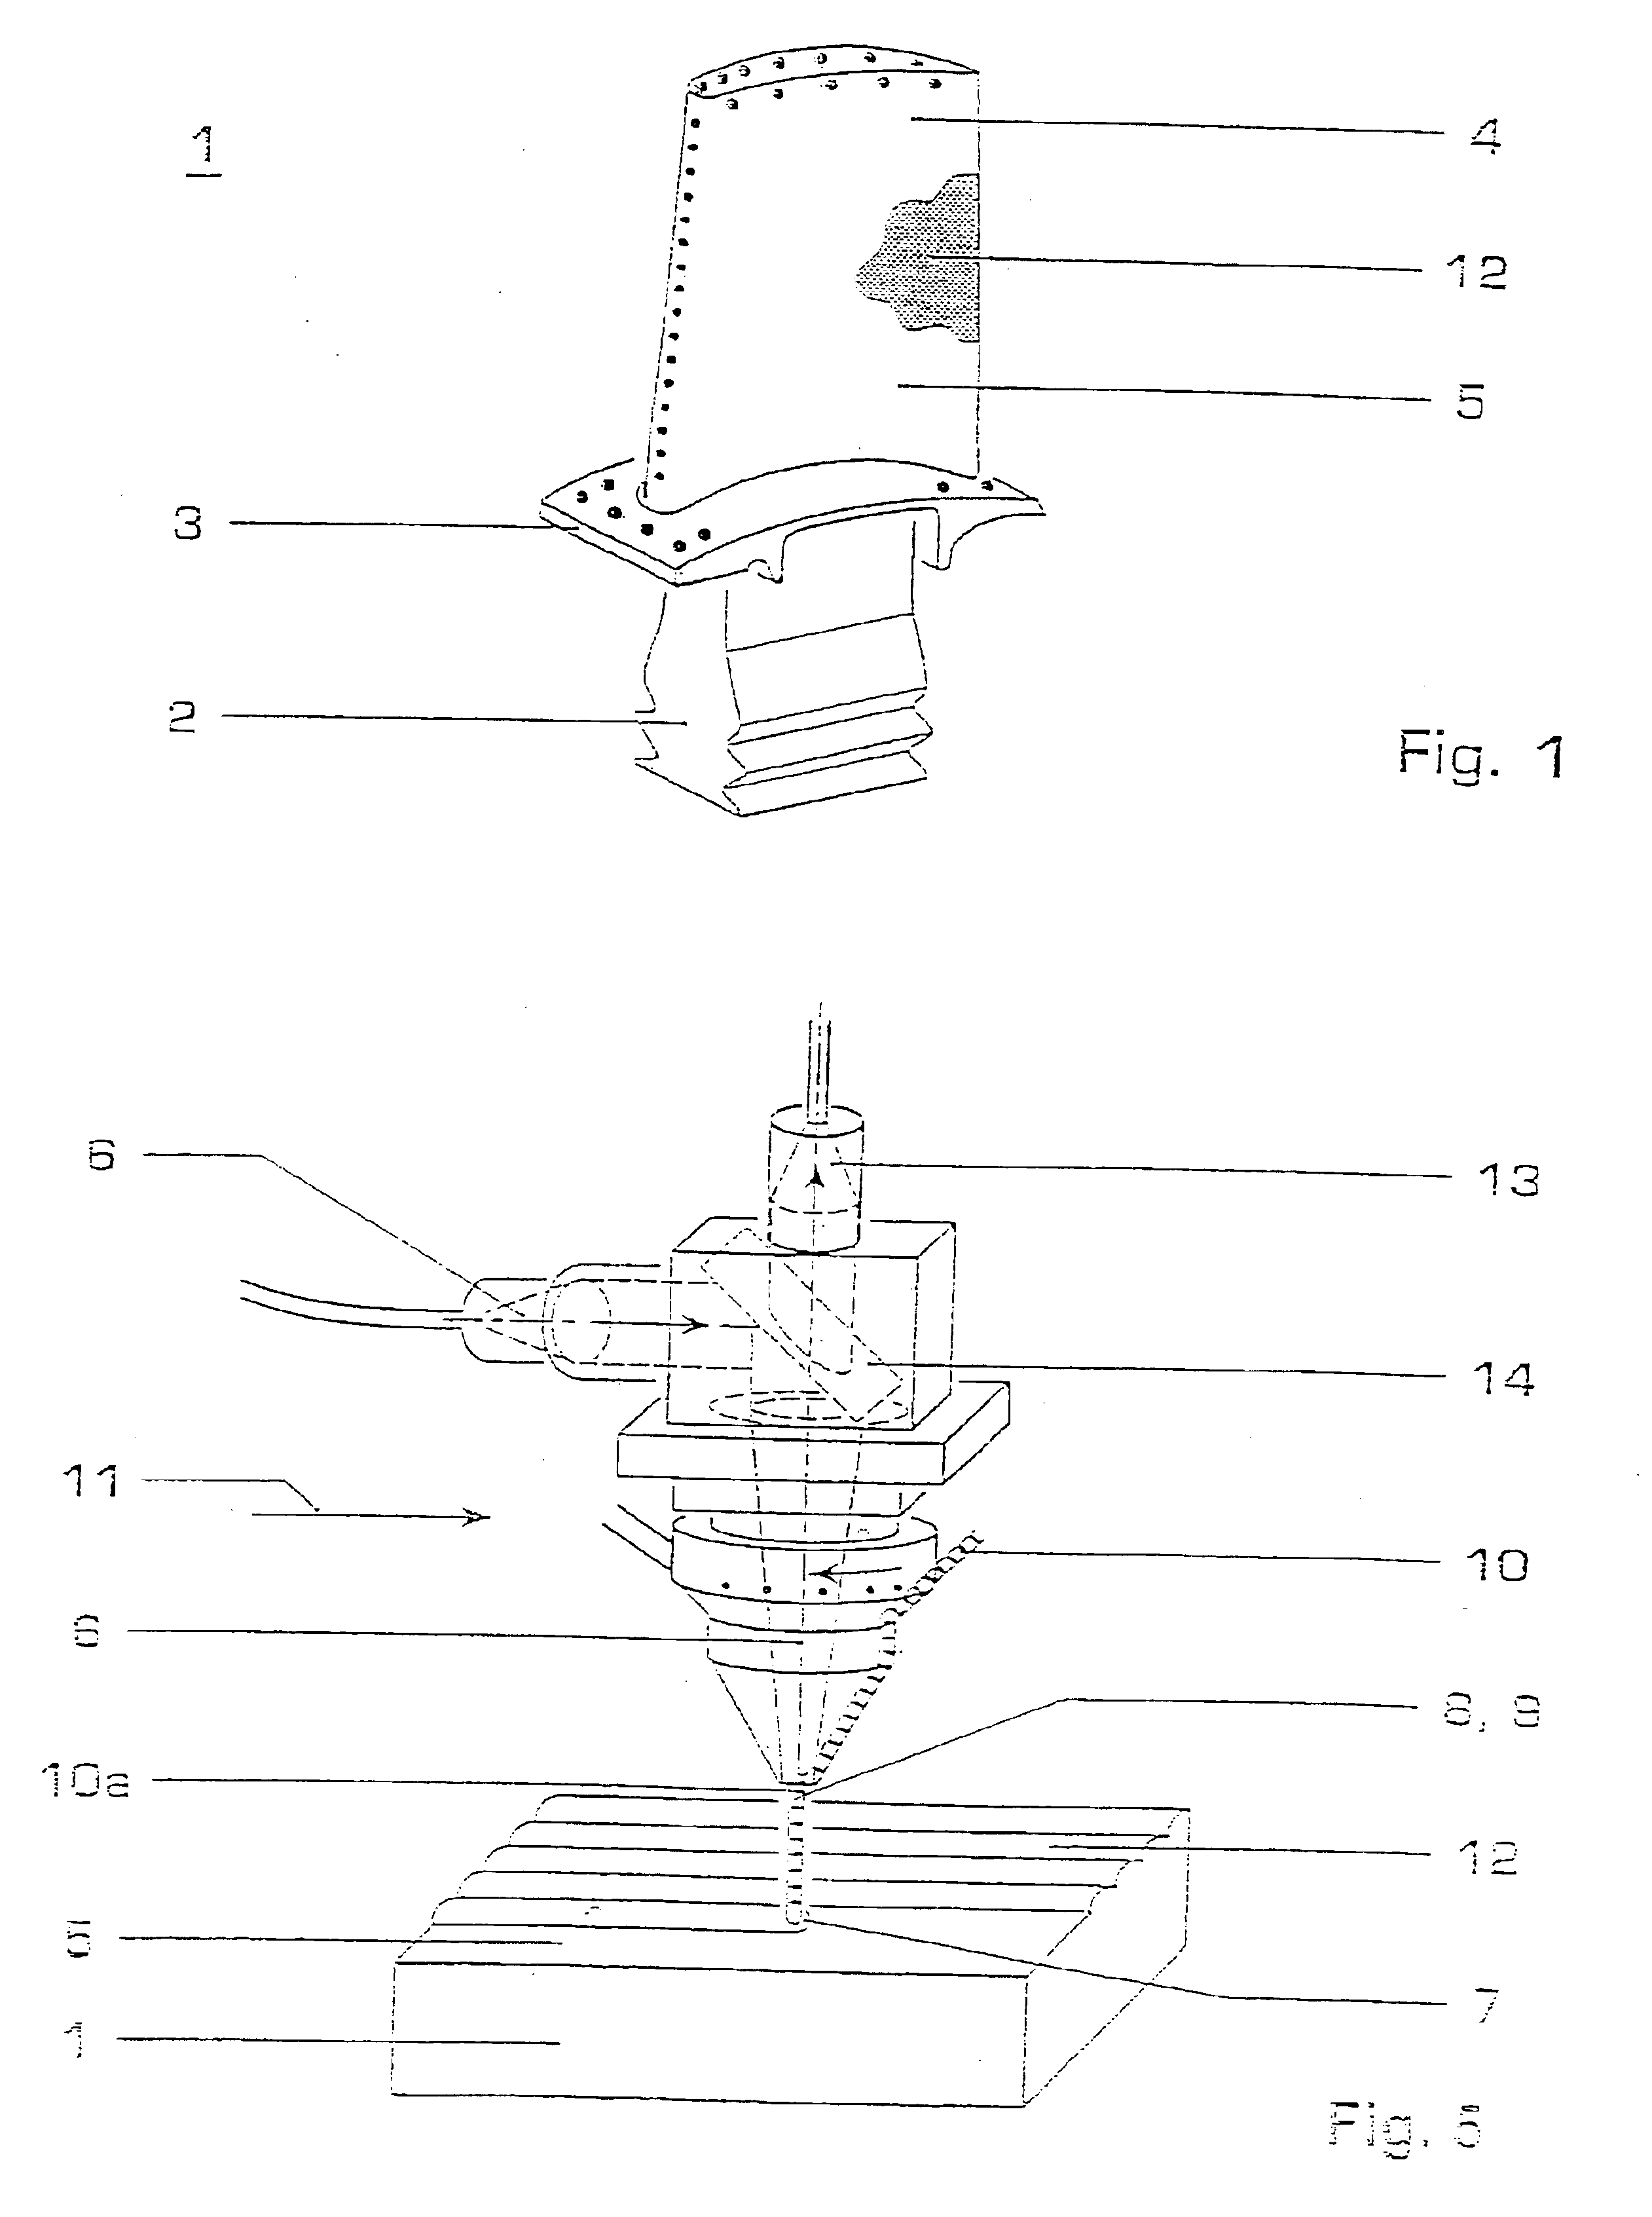 Method for fabricating, modifying or repairing of single crystal or directionally solidified articles